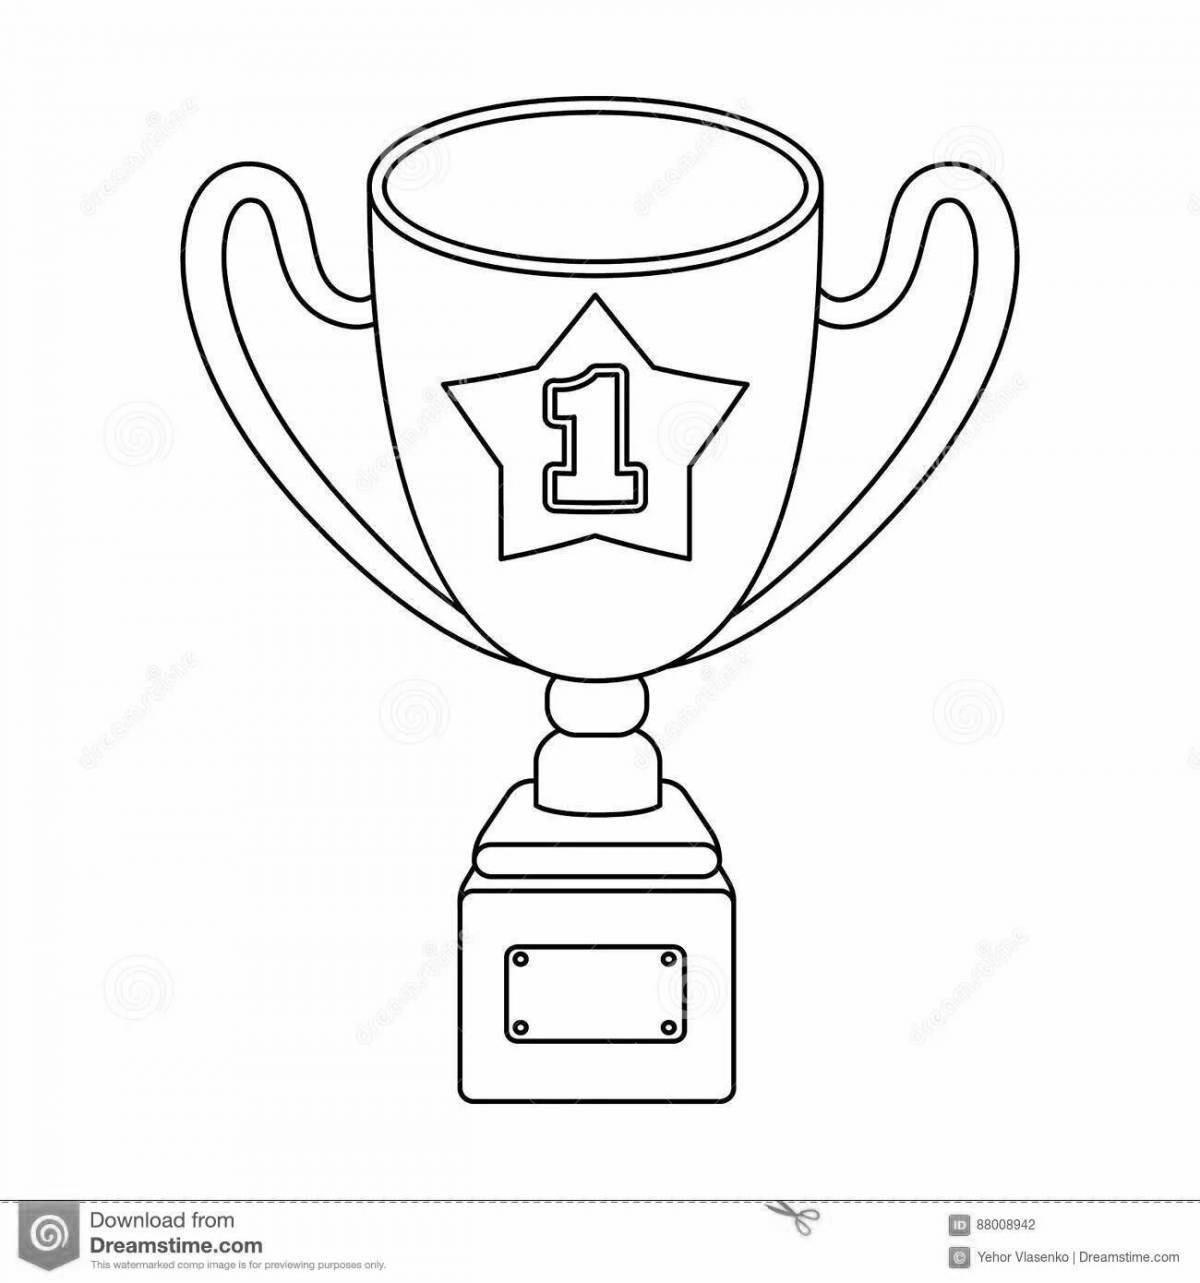 Coloring page festive football cup